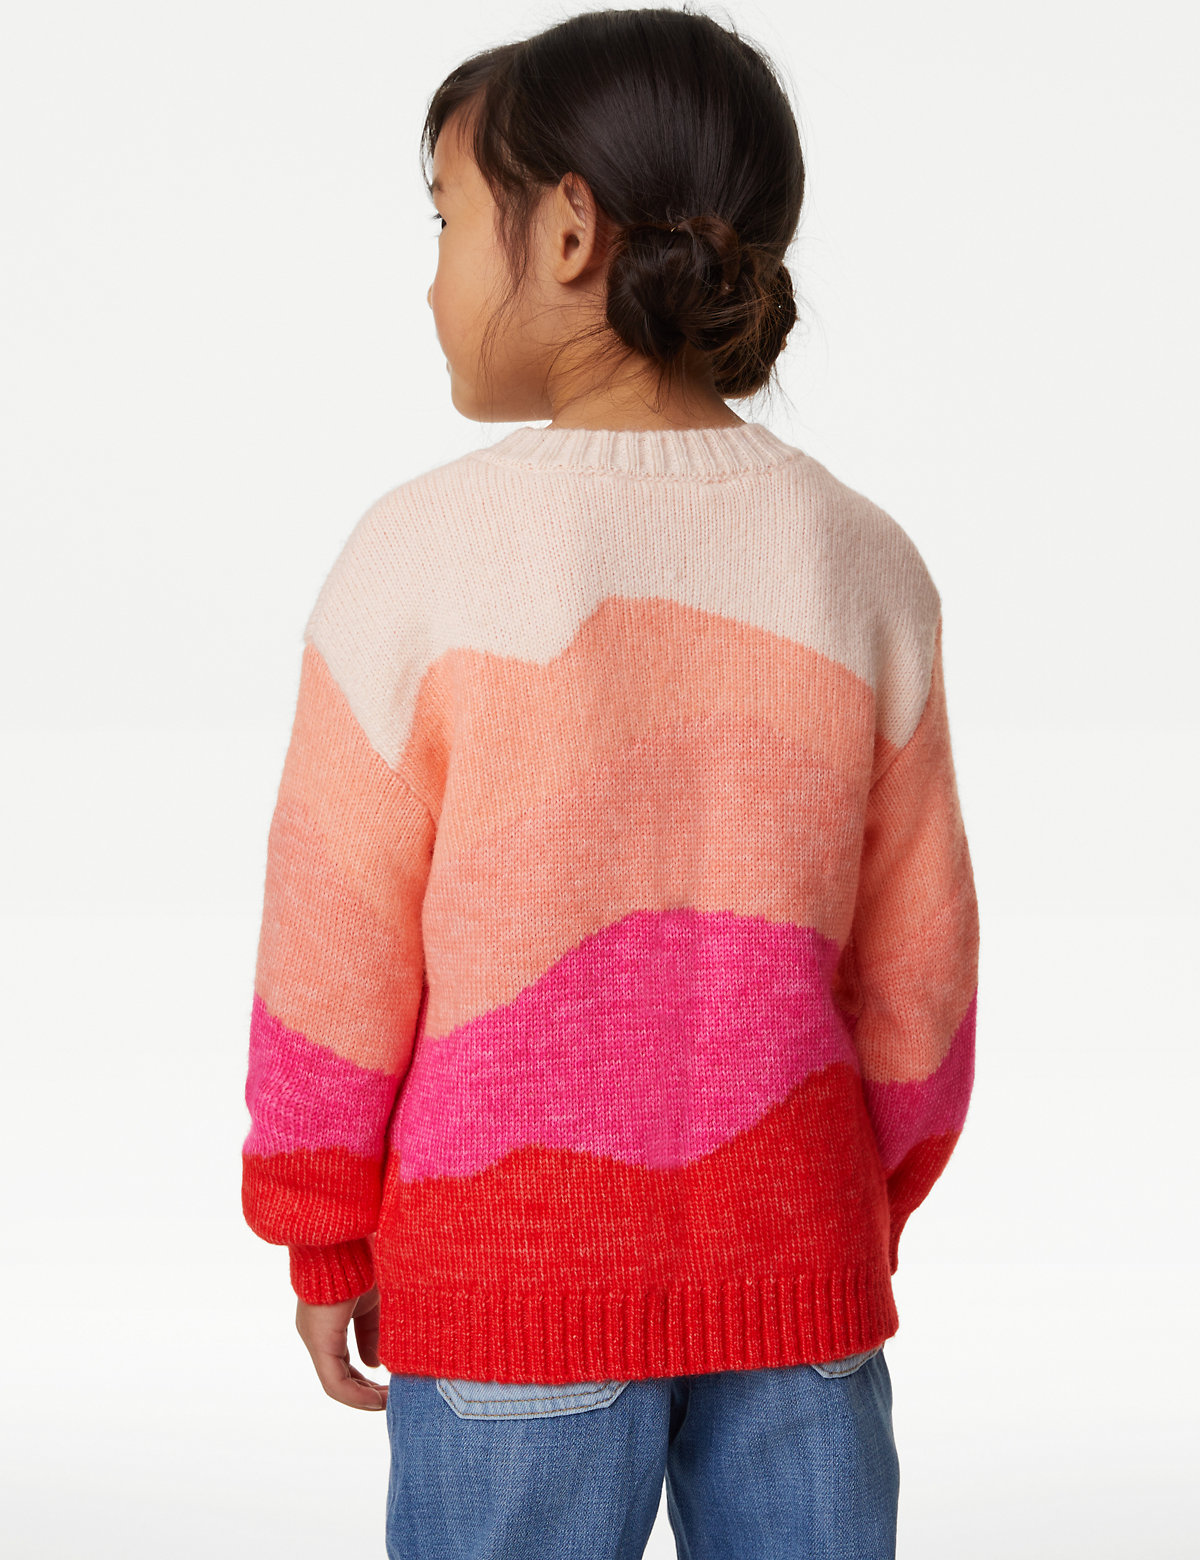 Abstract Knitted Jumper (2-8 Yrs)